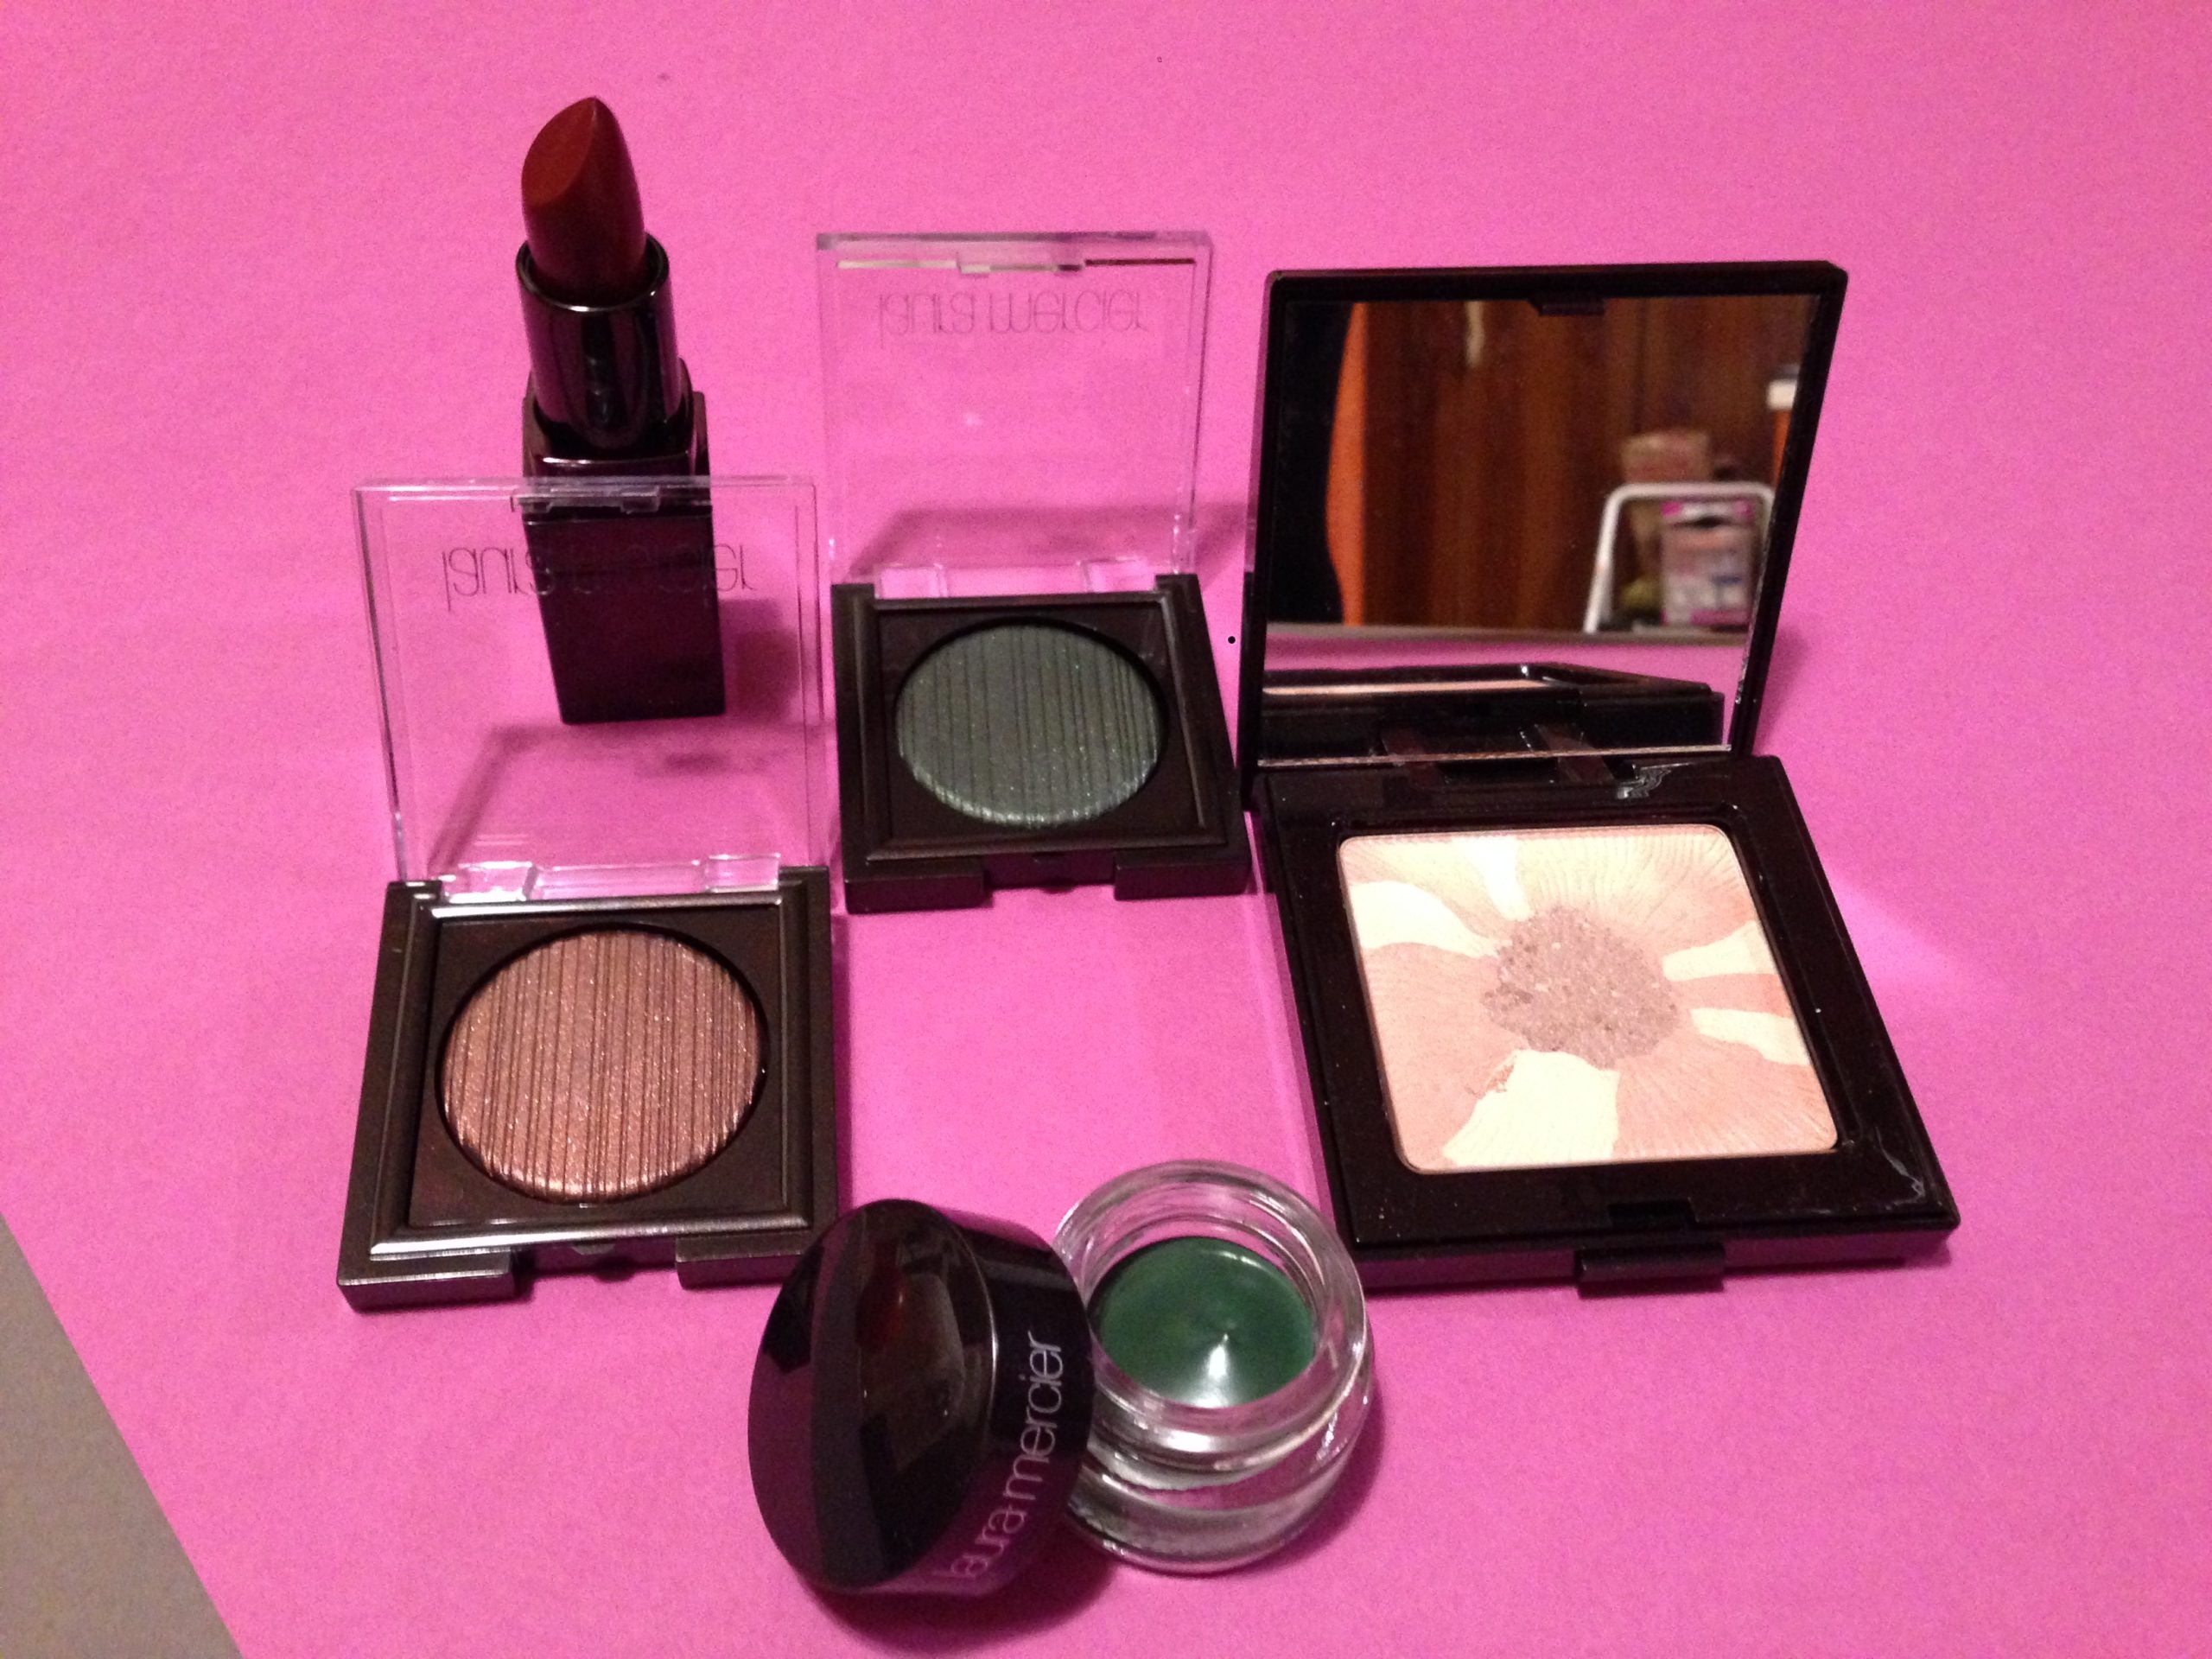 Review, Swatches, Laura, Mercier, Sensual, Reflections, Fall, 2014, Makeup, Collection, Green, Eyes, Brick, Red, Lips